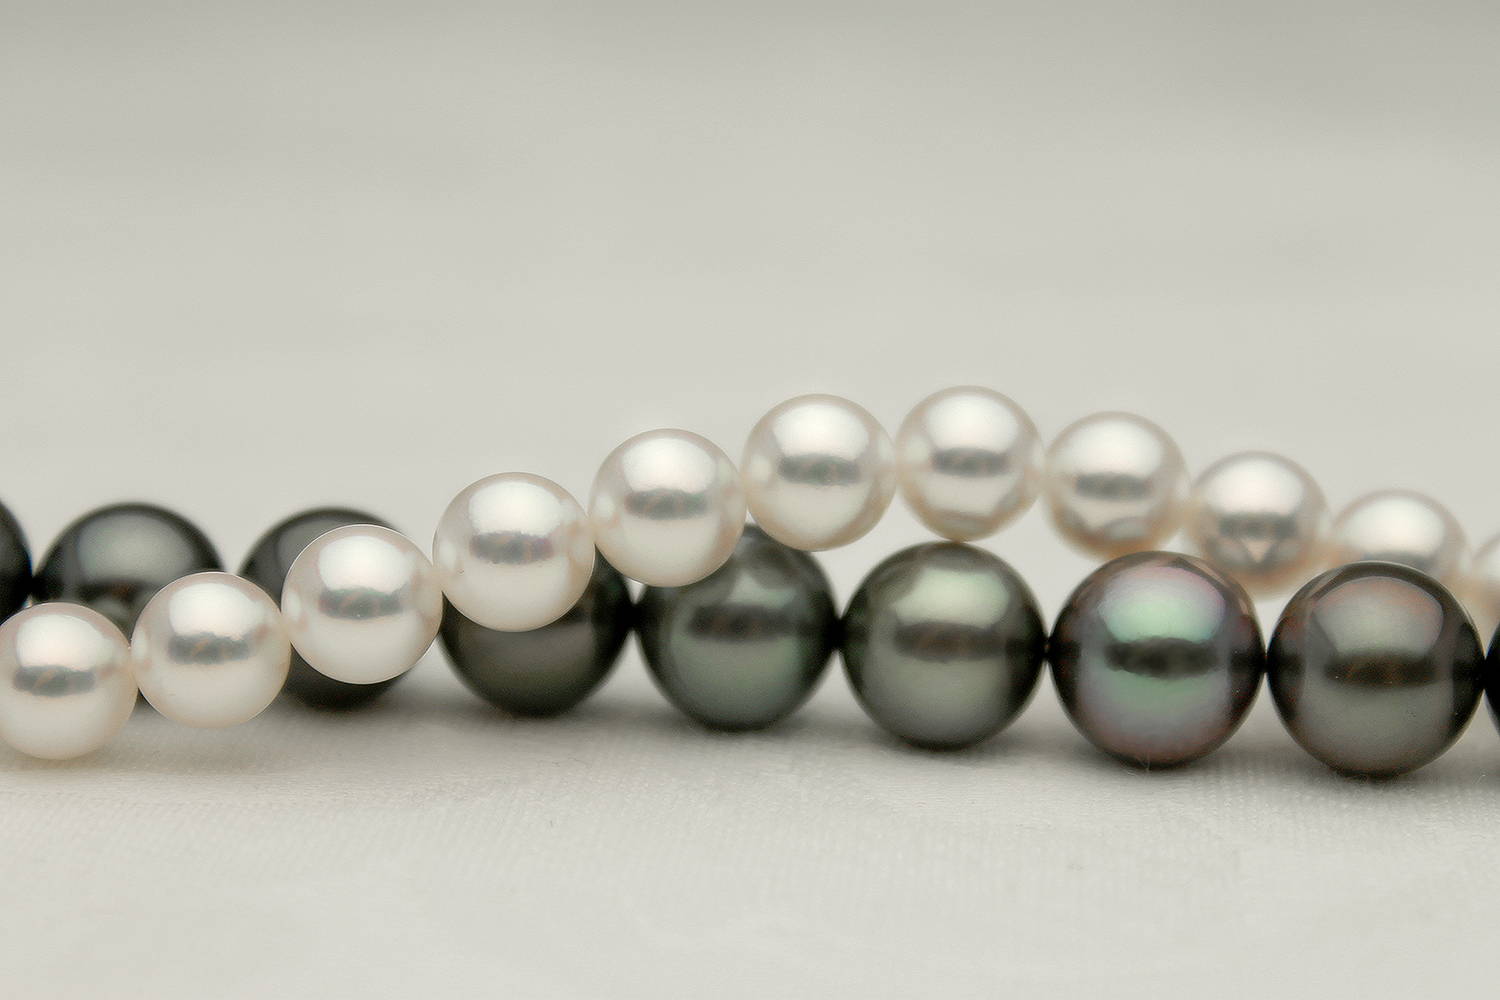 What Makes Pearls Valuable?